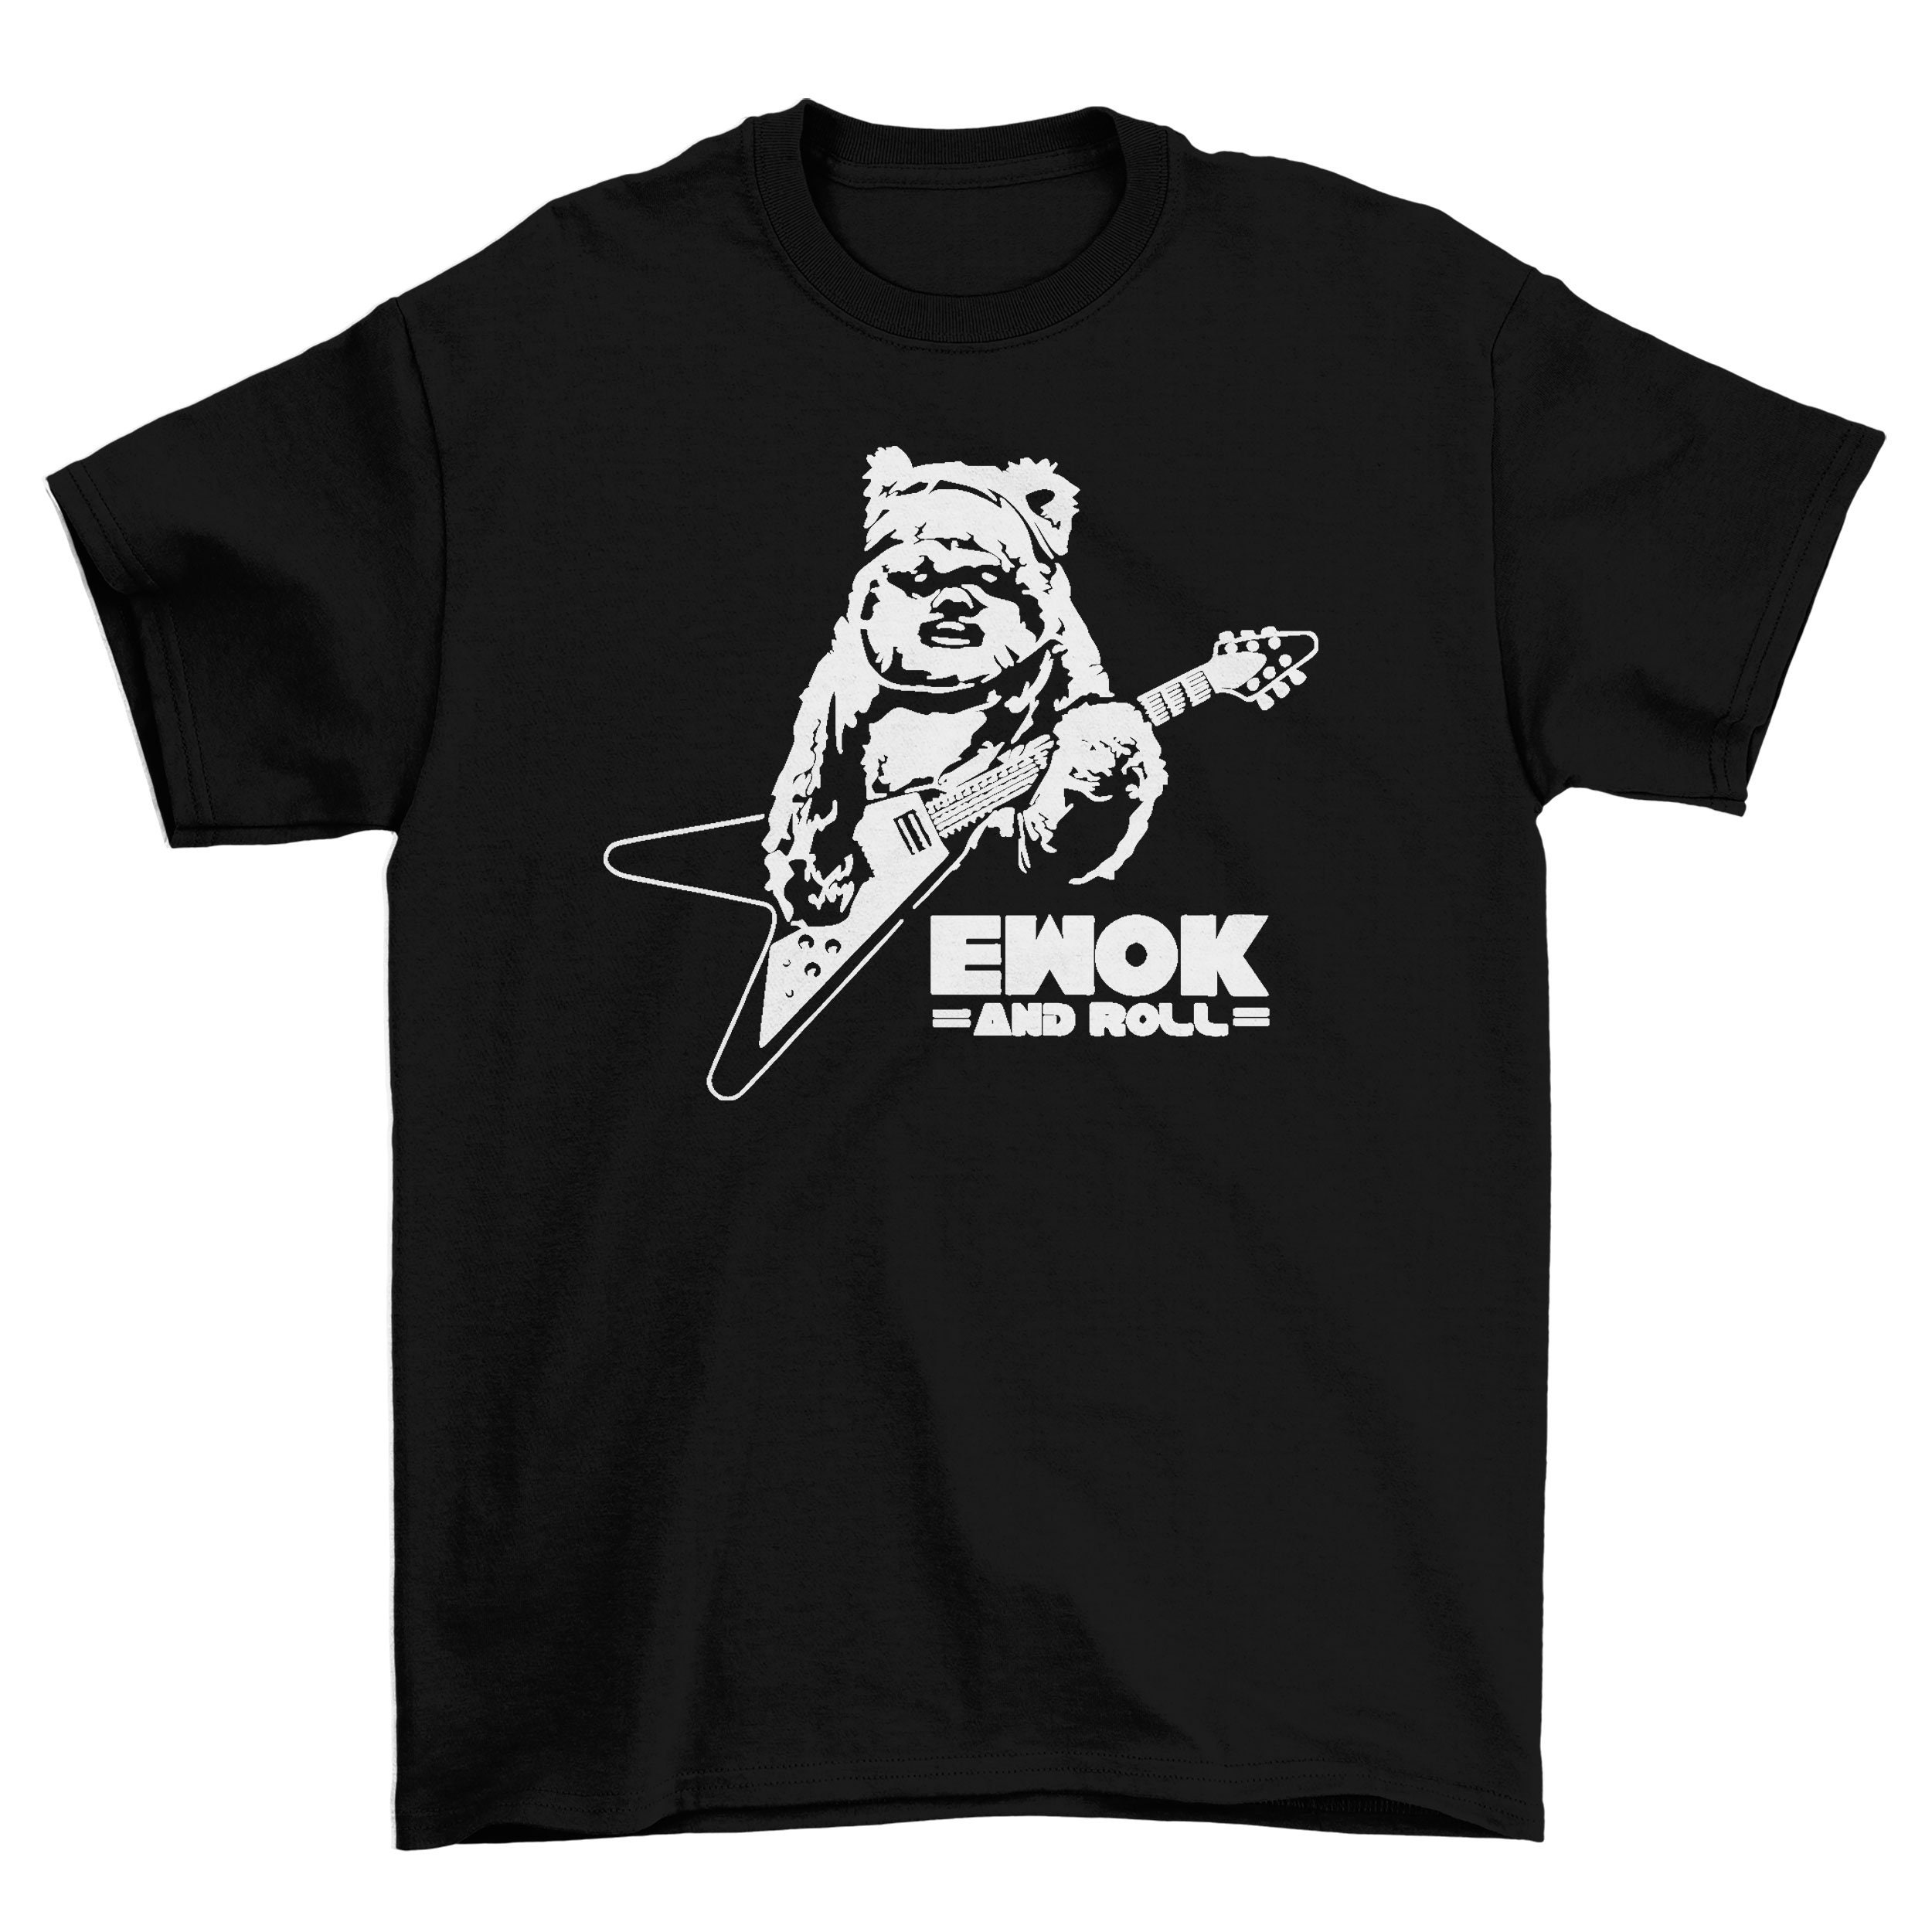 Discover Ewok And Roll Funny Star Wars Tee Shirt Top Unisex Sizes